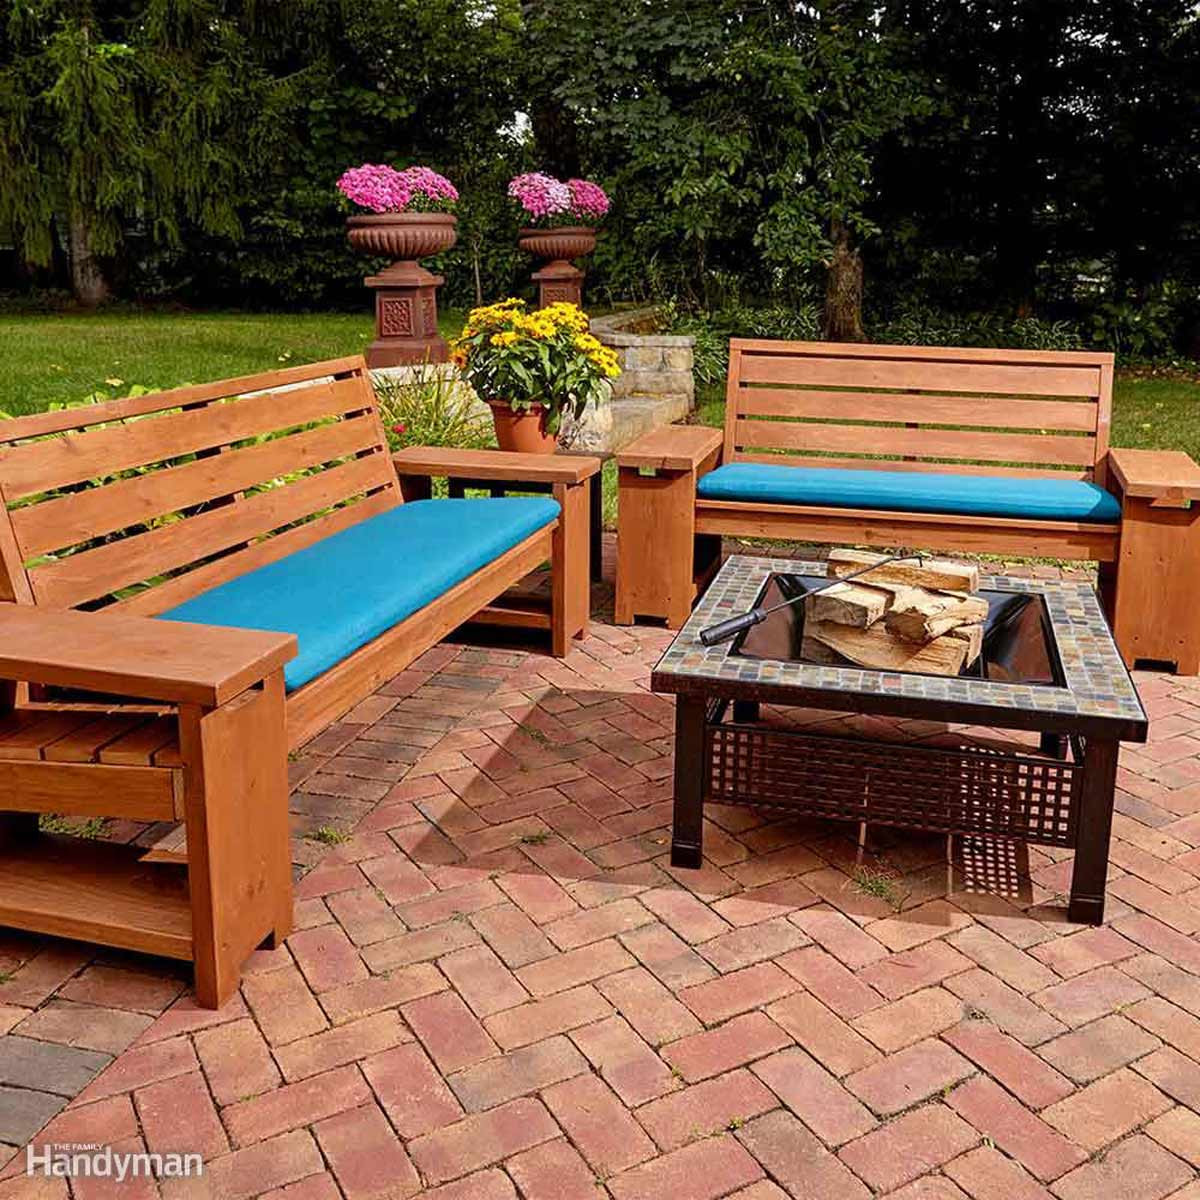 DIY Outdoor Furniture Plans
 15 Awesome Plans for DIY Patio Furniture